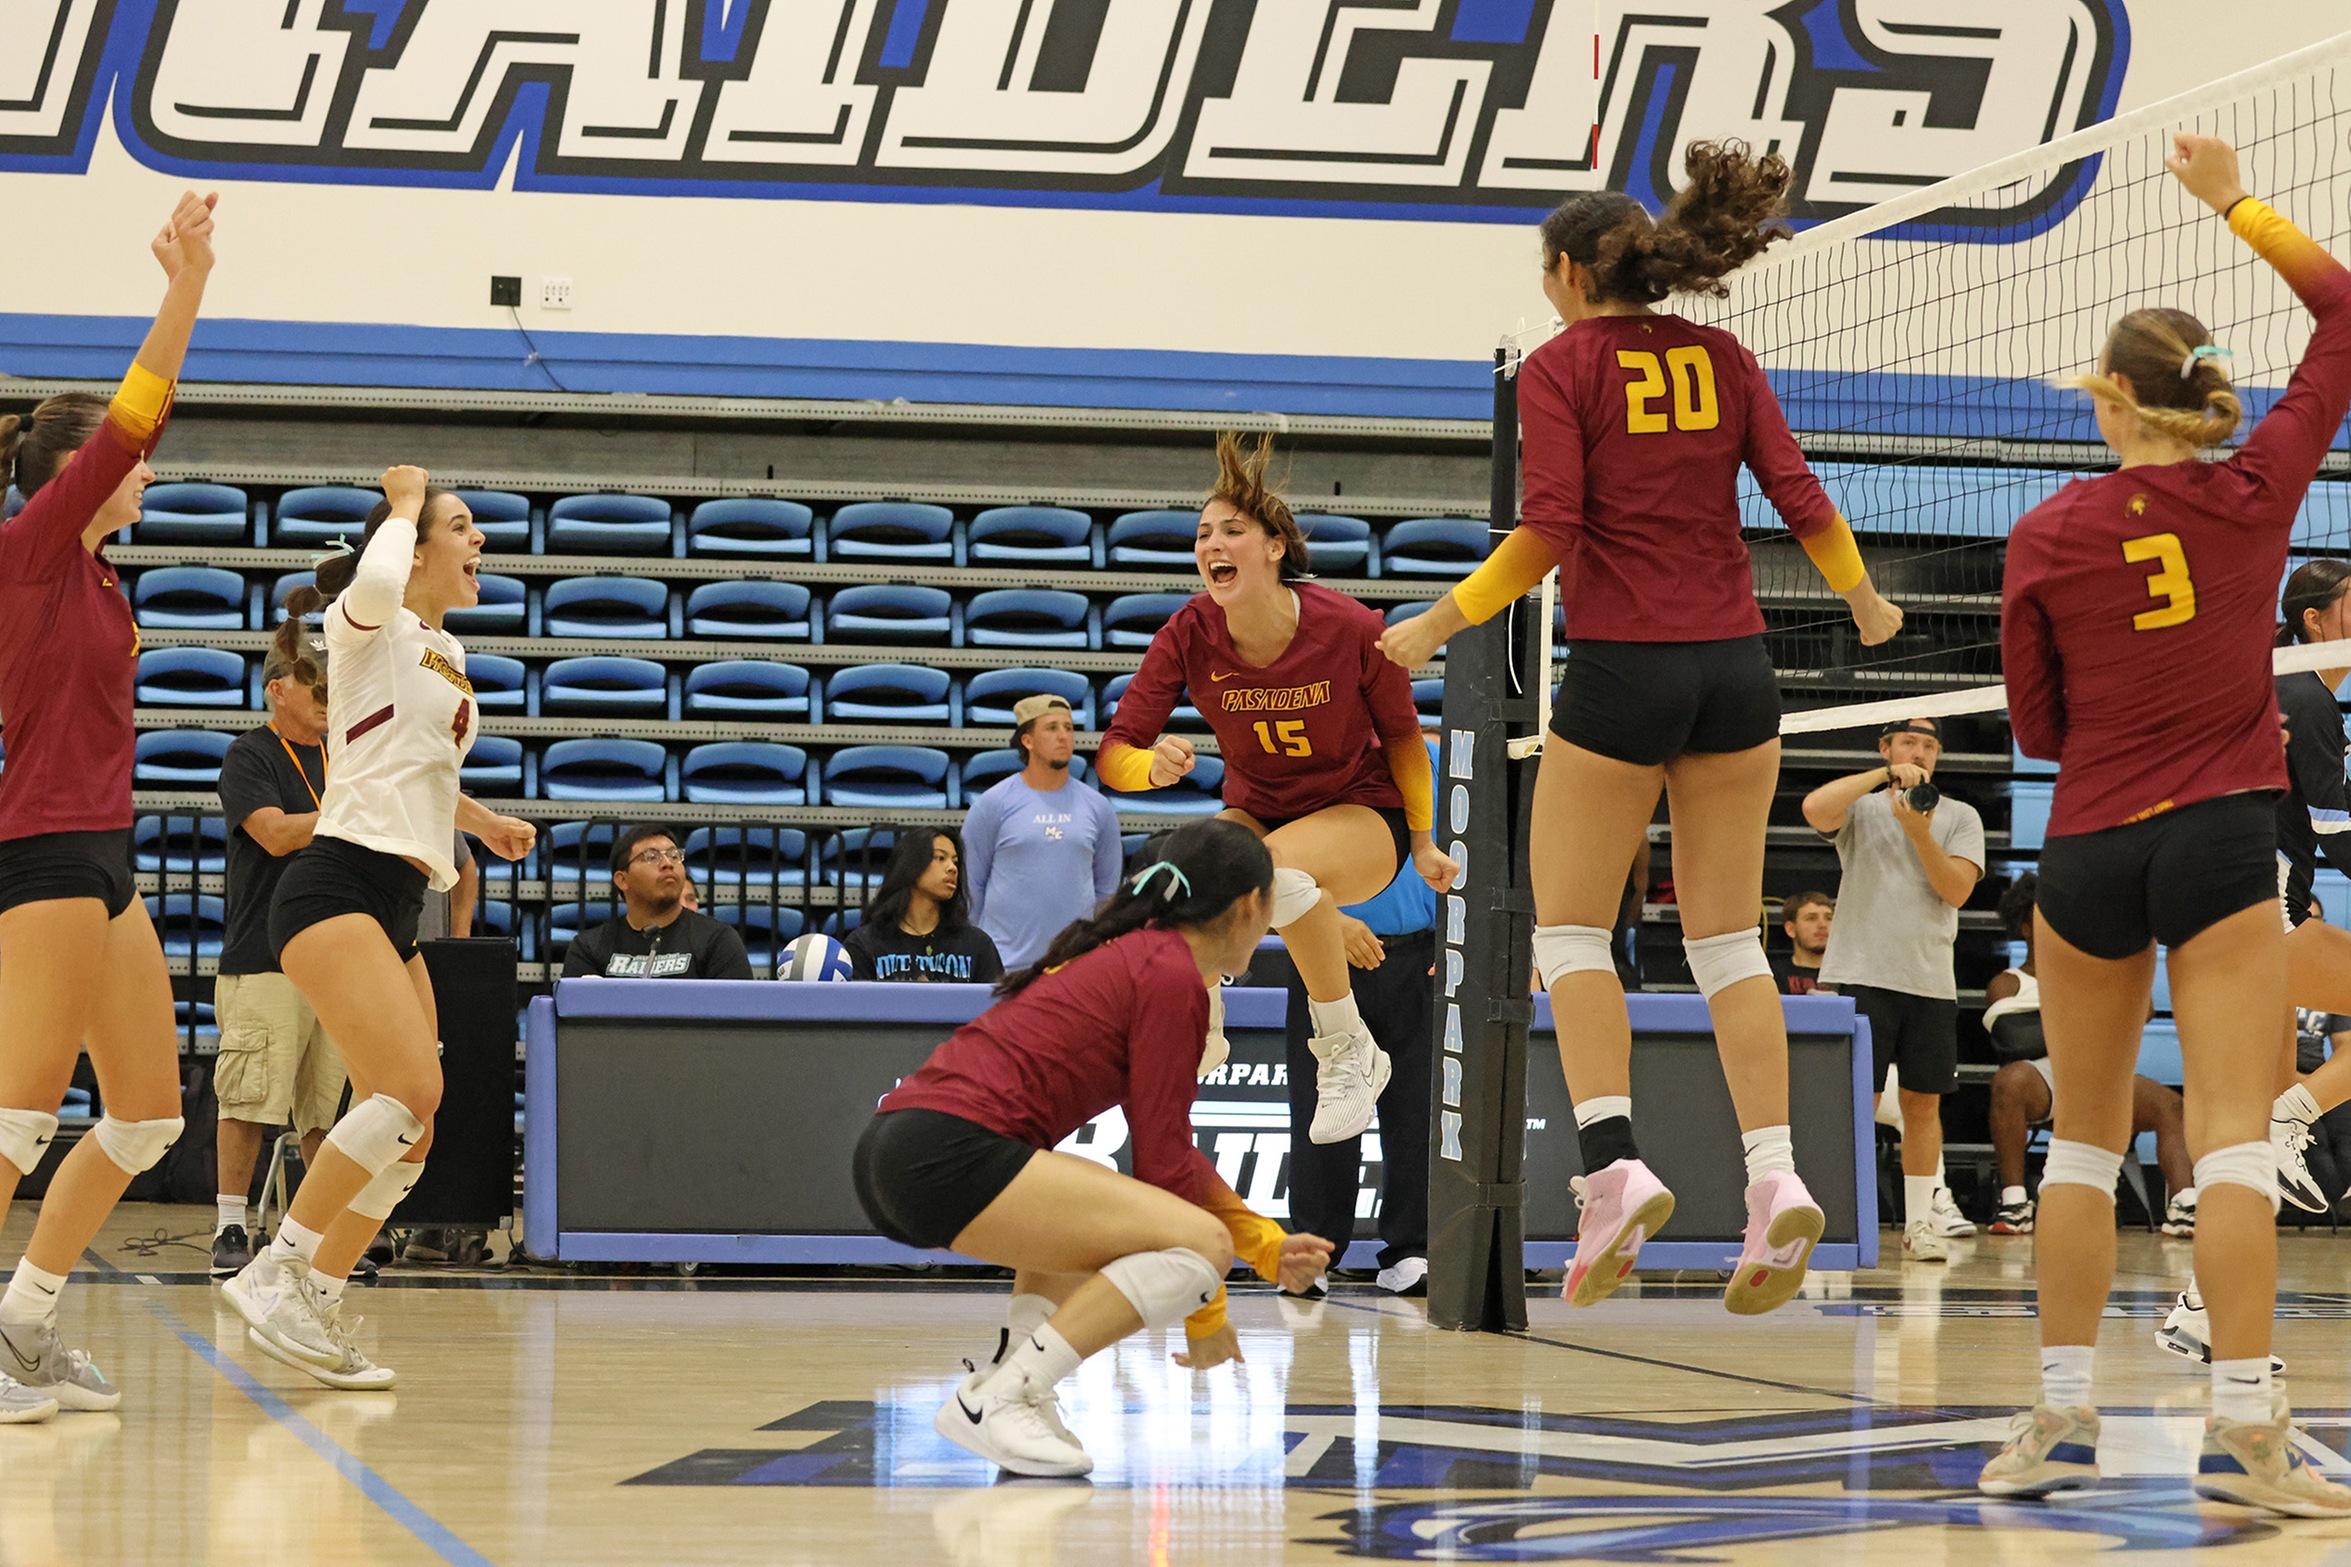 The PCC volleyball team lets its emotions out after match point in a thriller at Moorpark (photo by Richard Quinton).